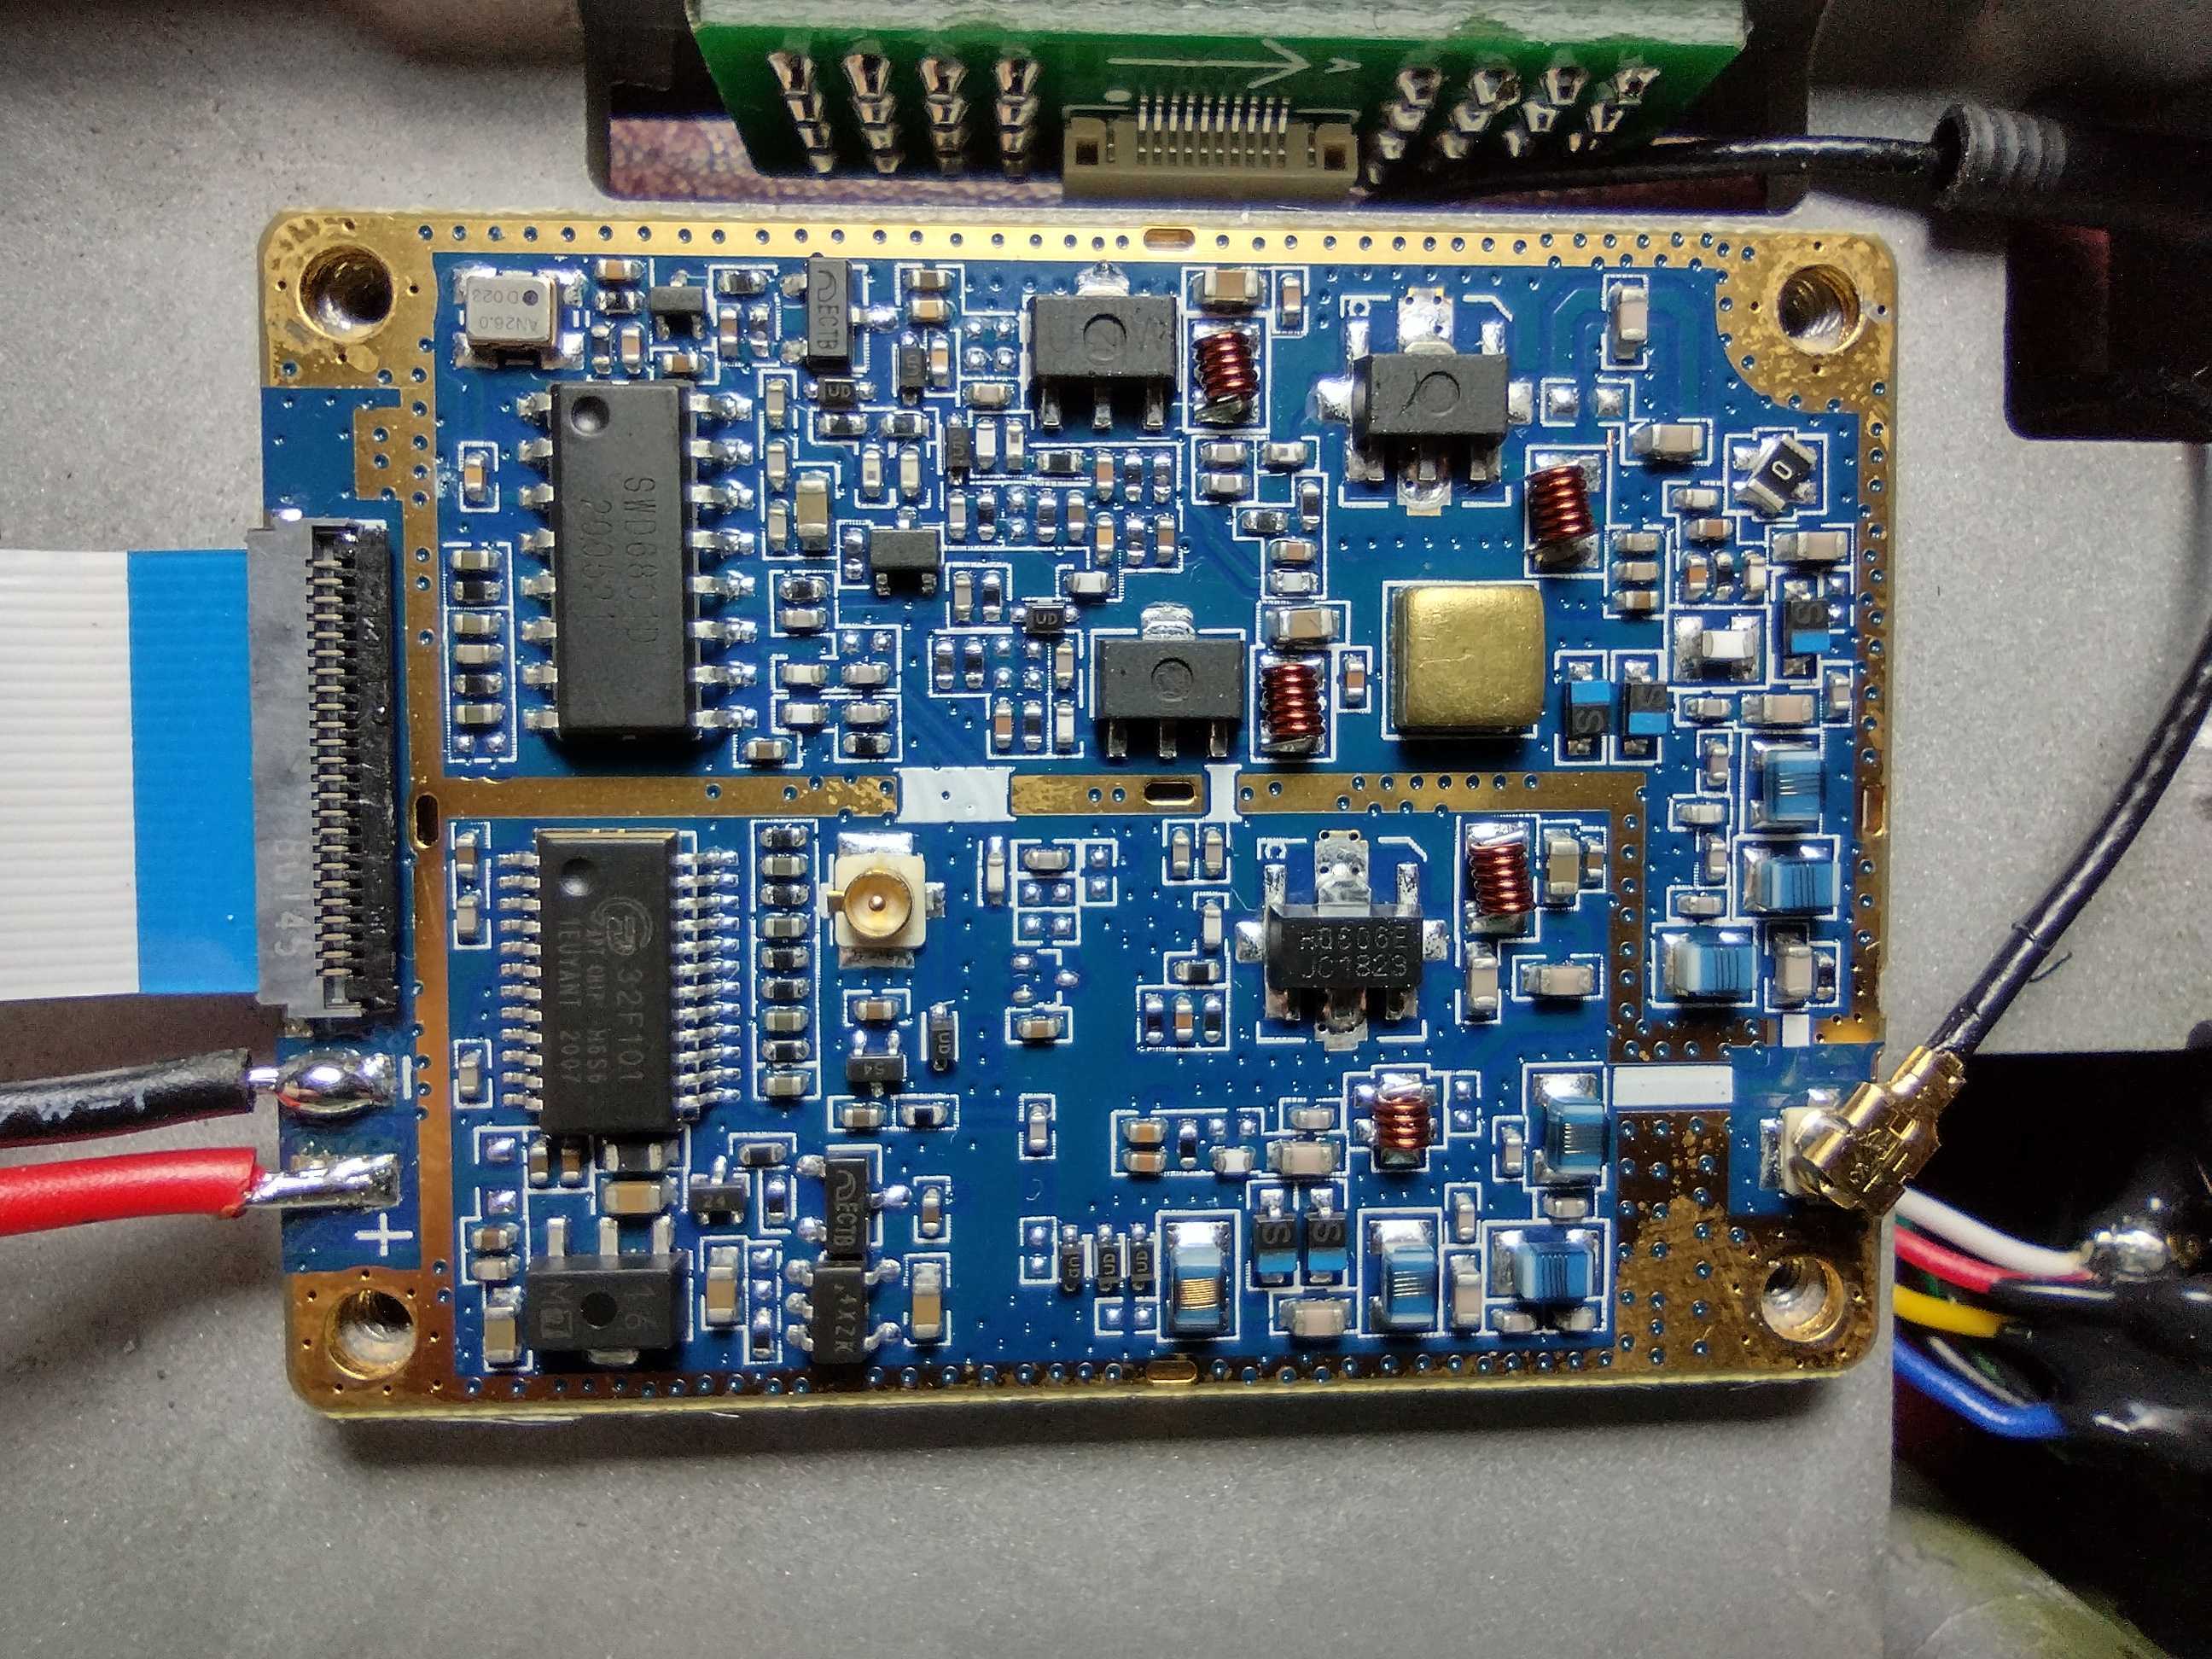 The RF module board top, with the RF shield removed